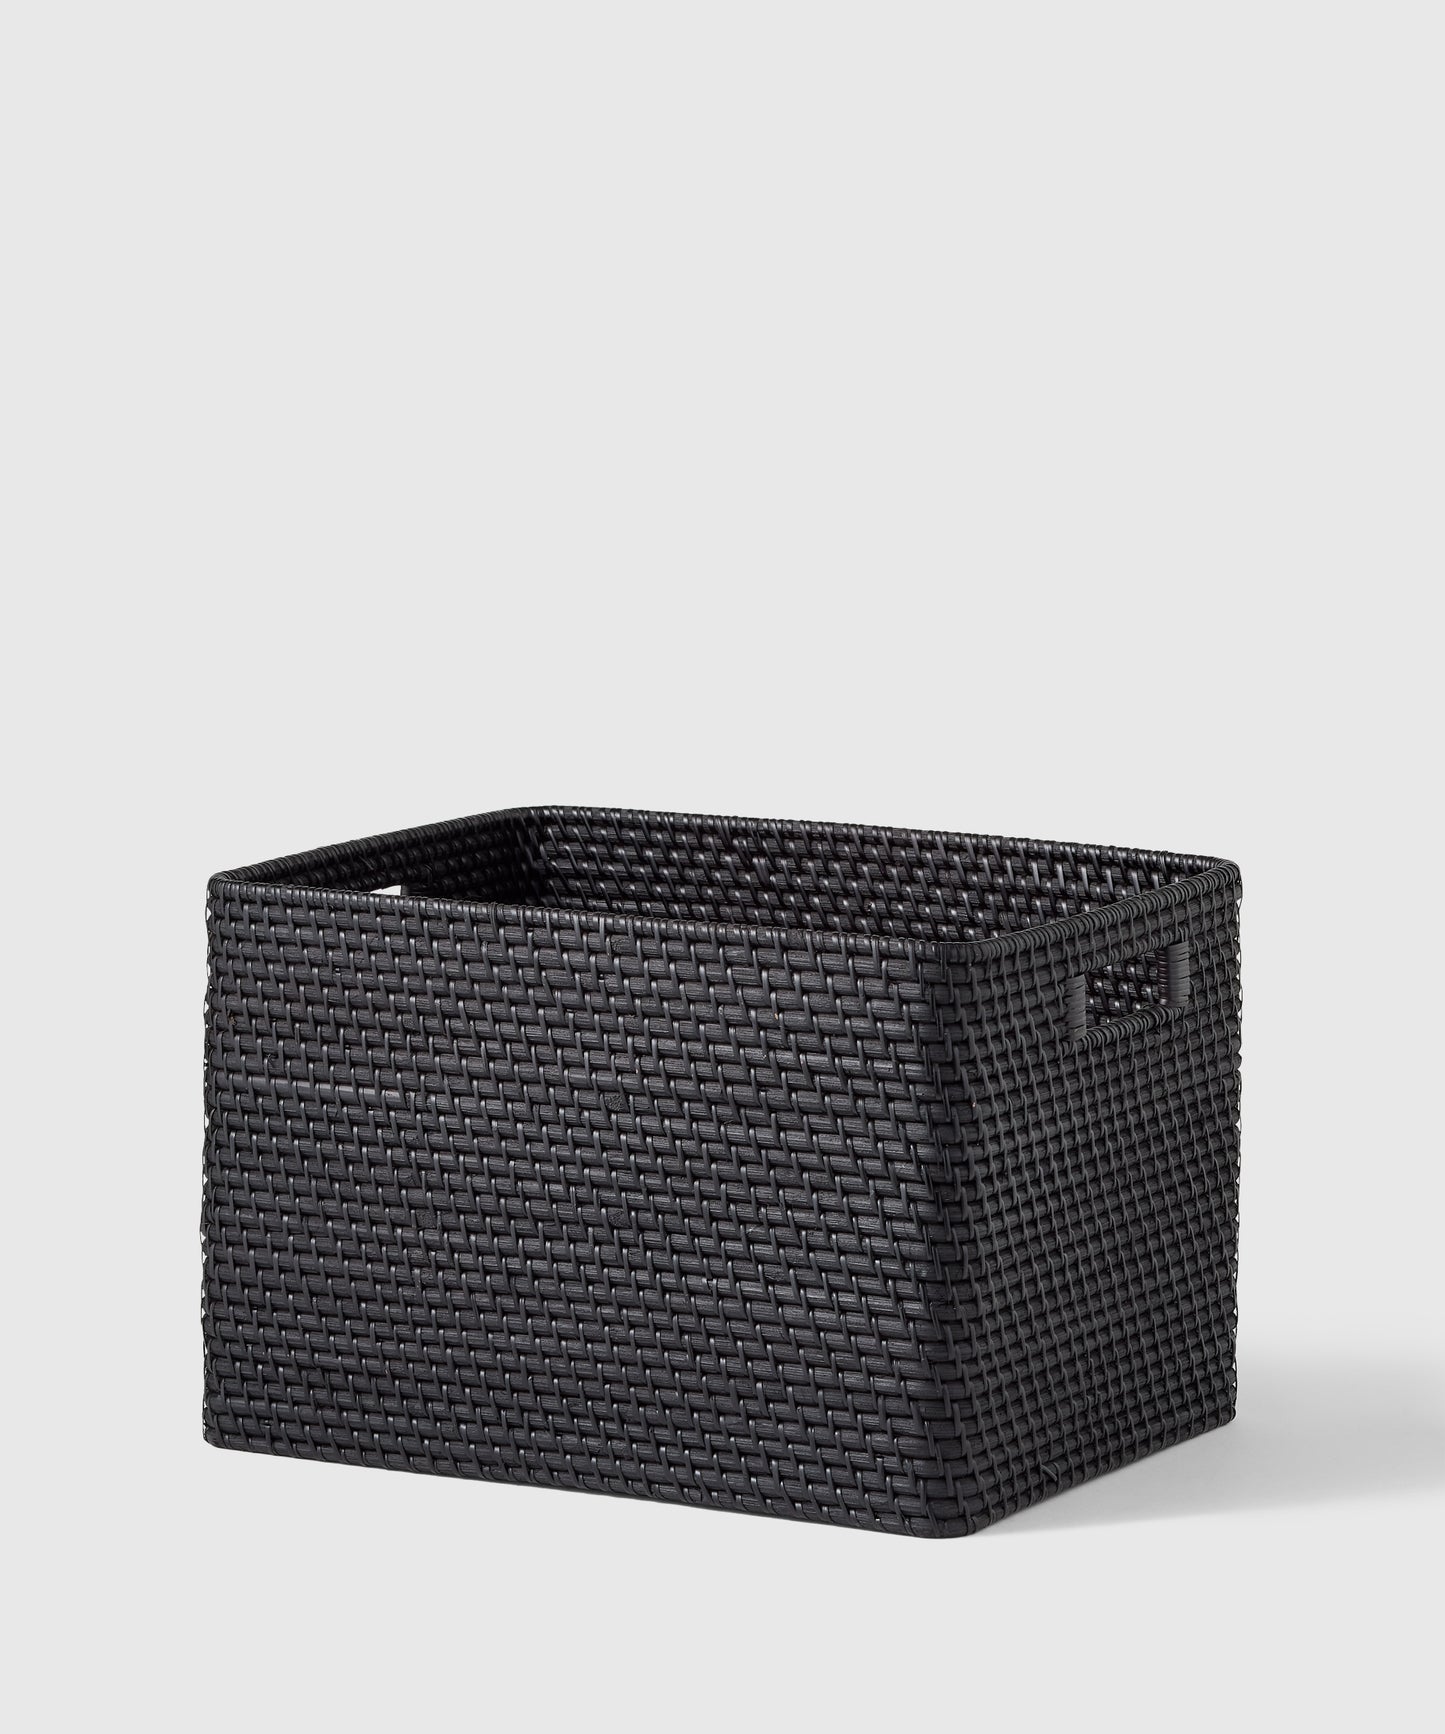 Extra-Large Woven Black Rattan Bin | The Container Store x KonMari by Marie Kondo 